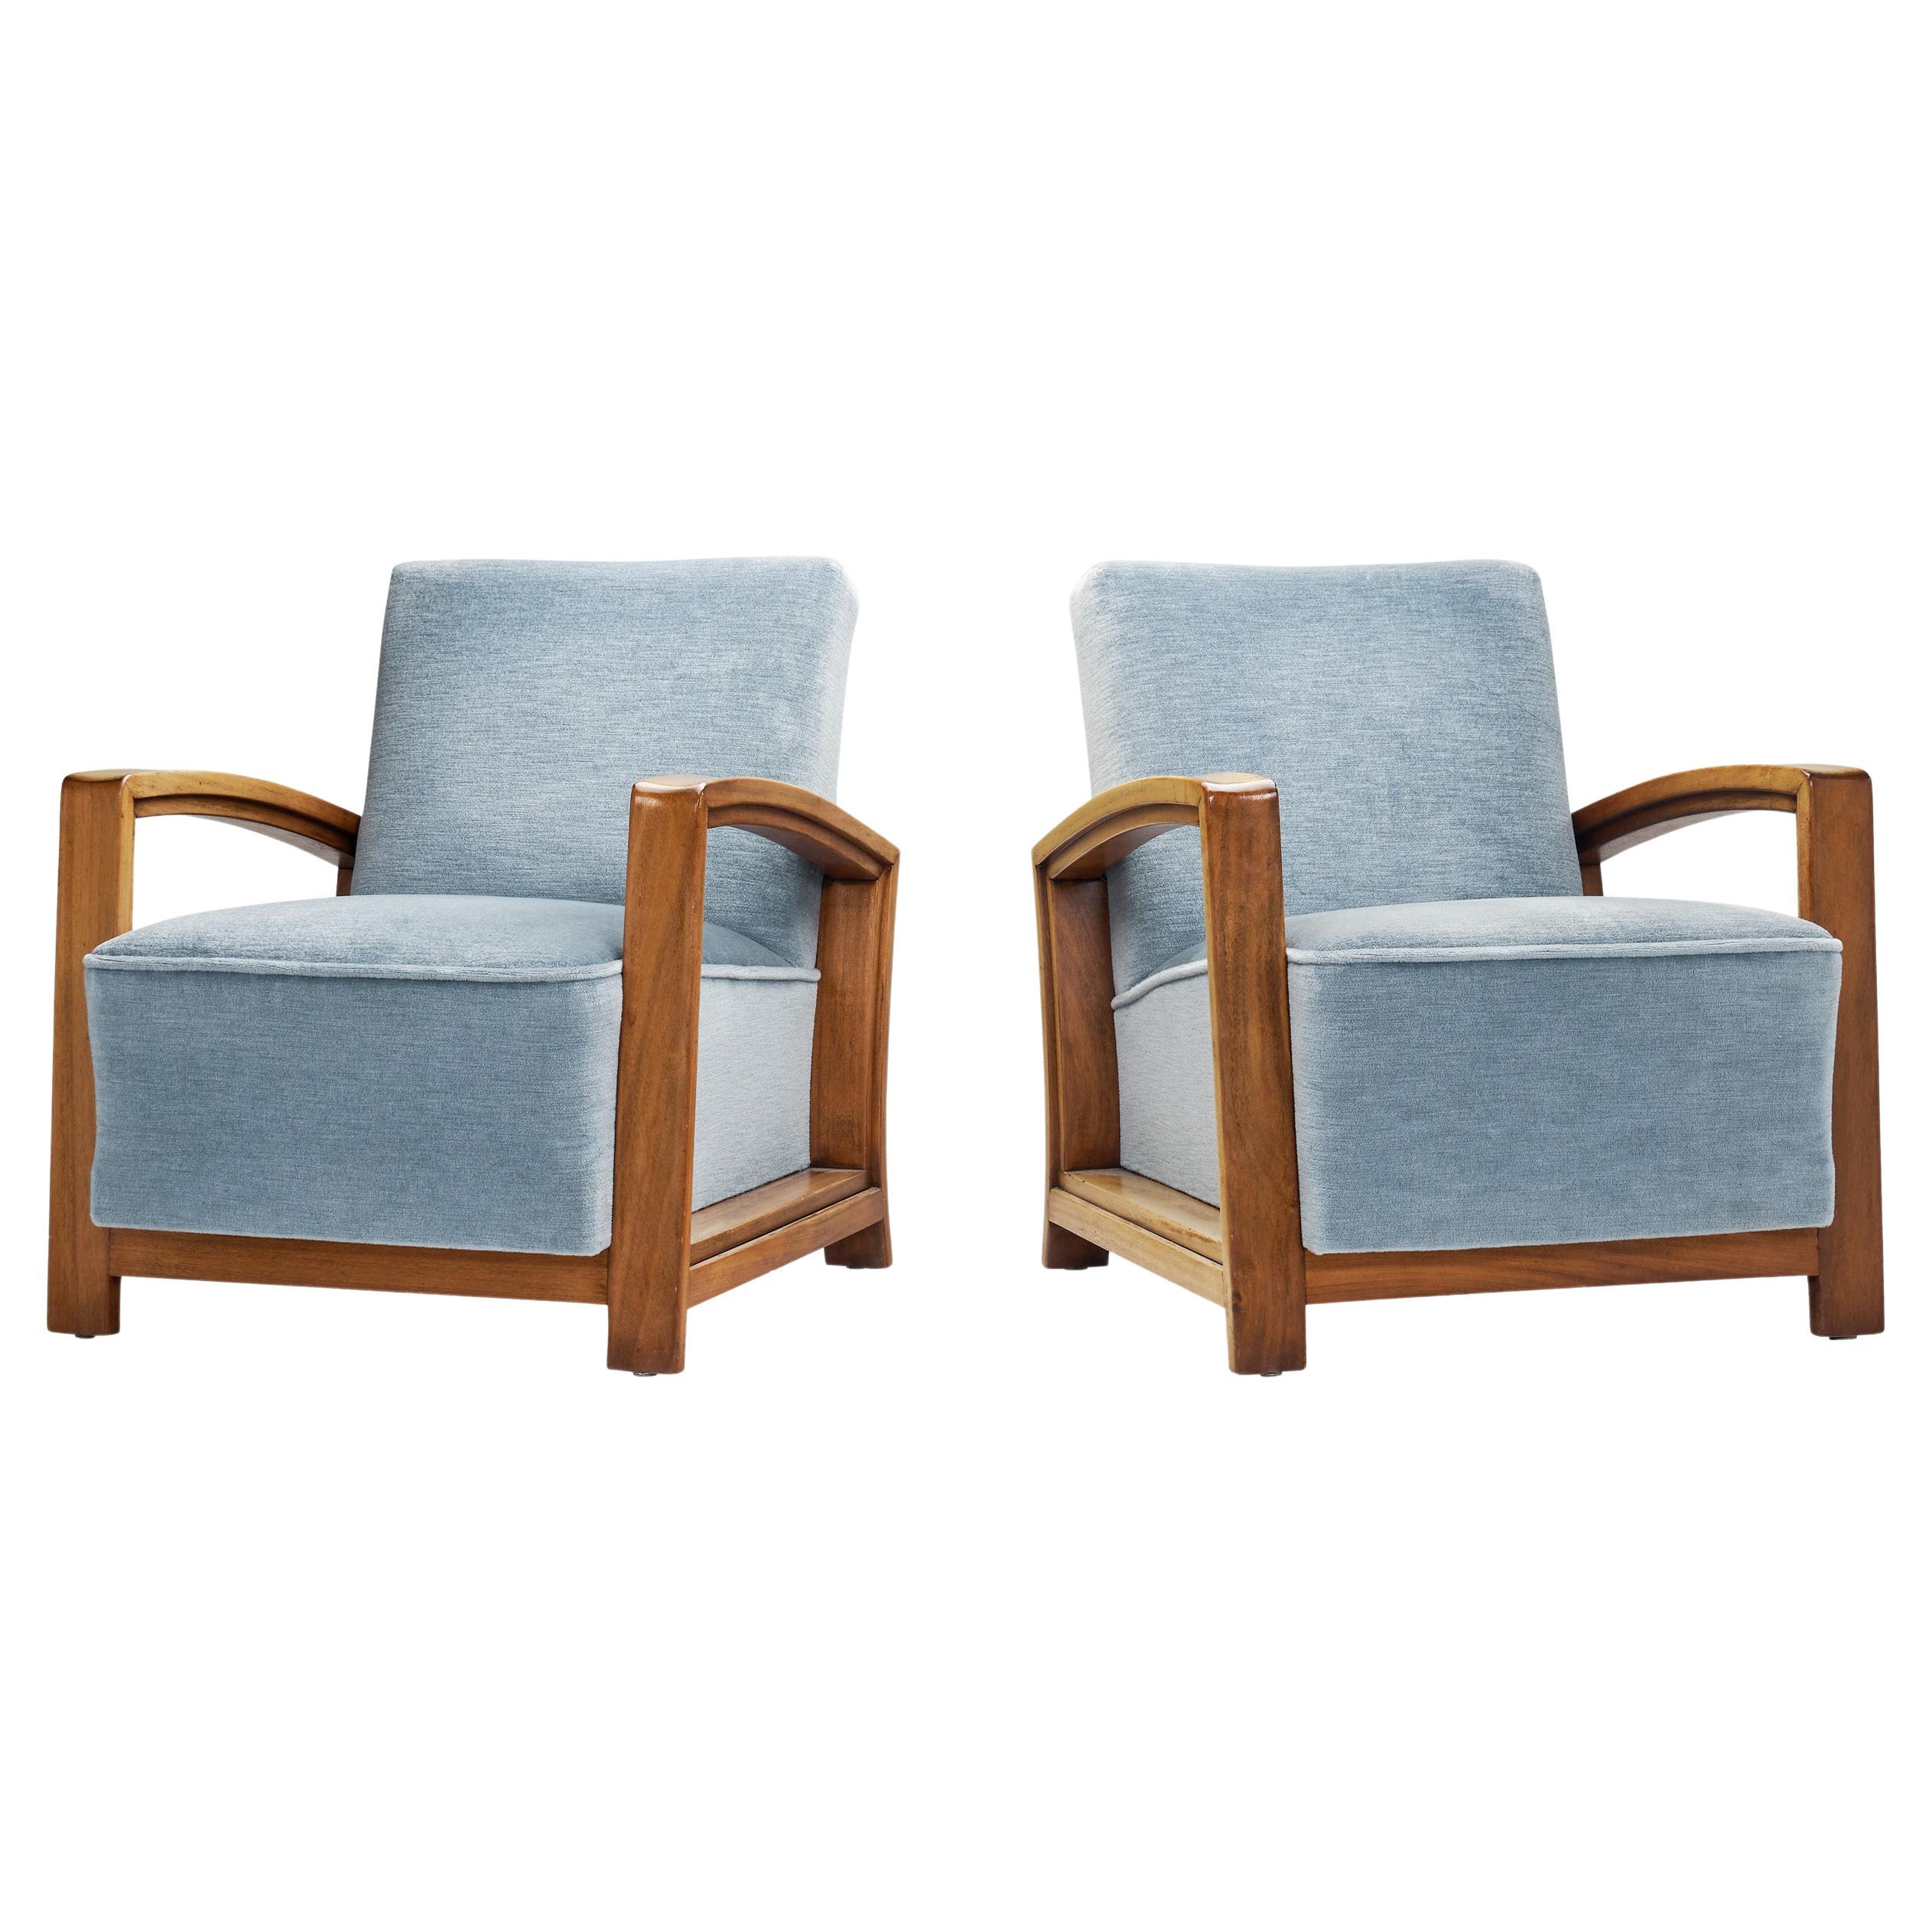 Art Deco Smoker Armchairs in Light Blue Velour, The Netherlands ca 1930s For Sale